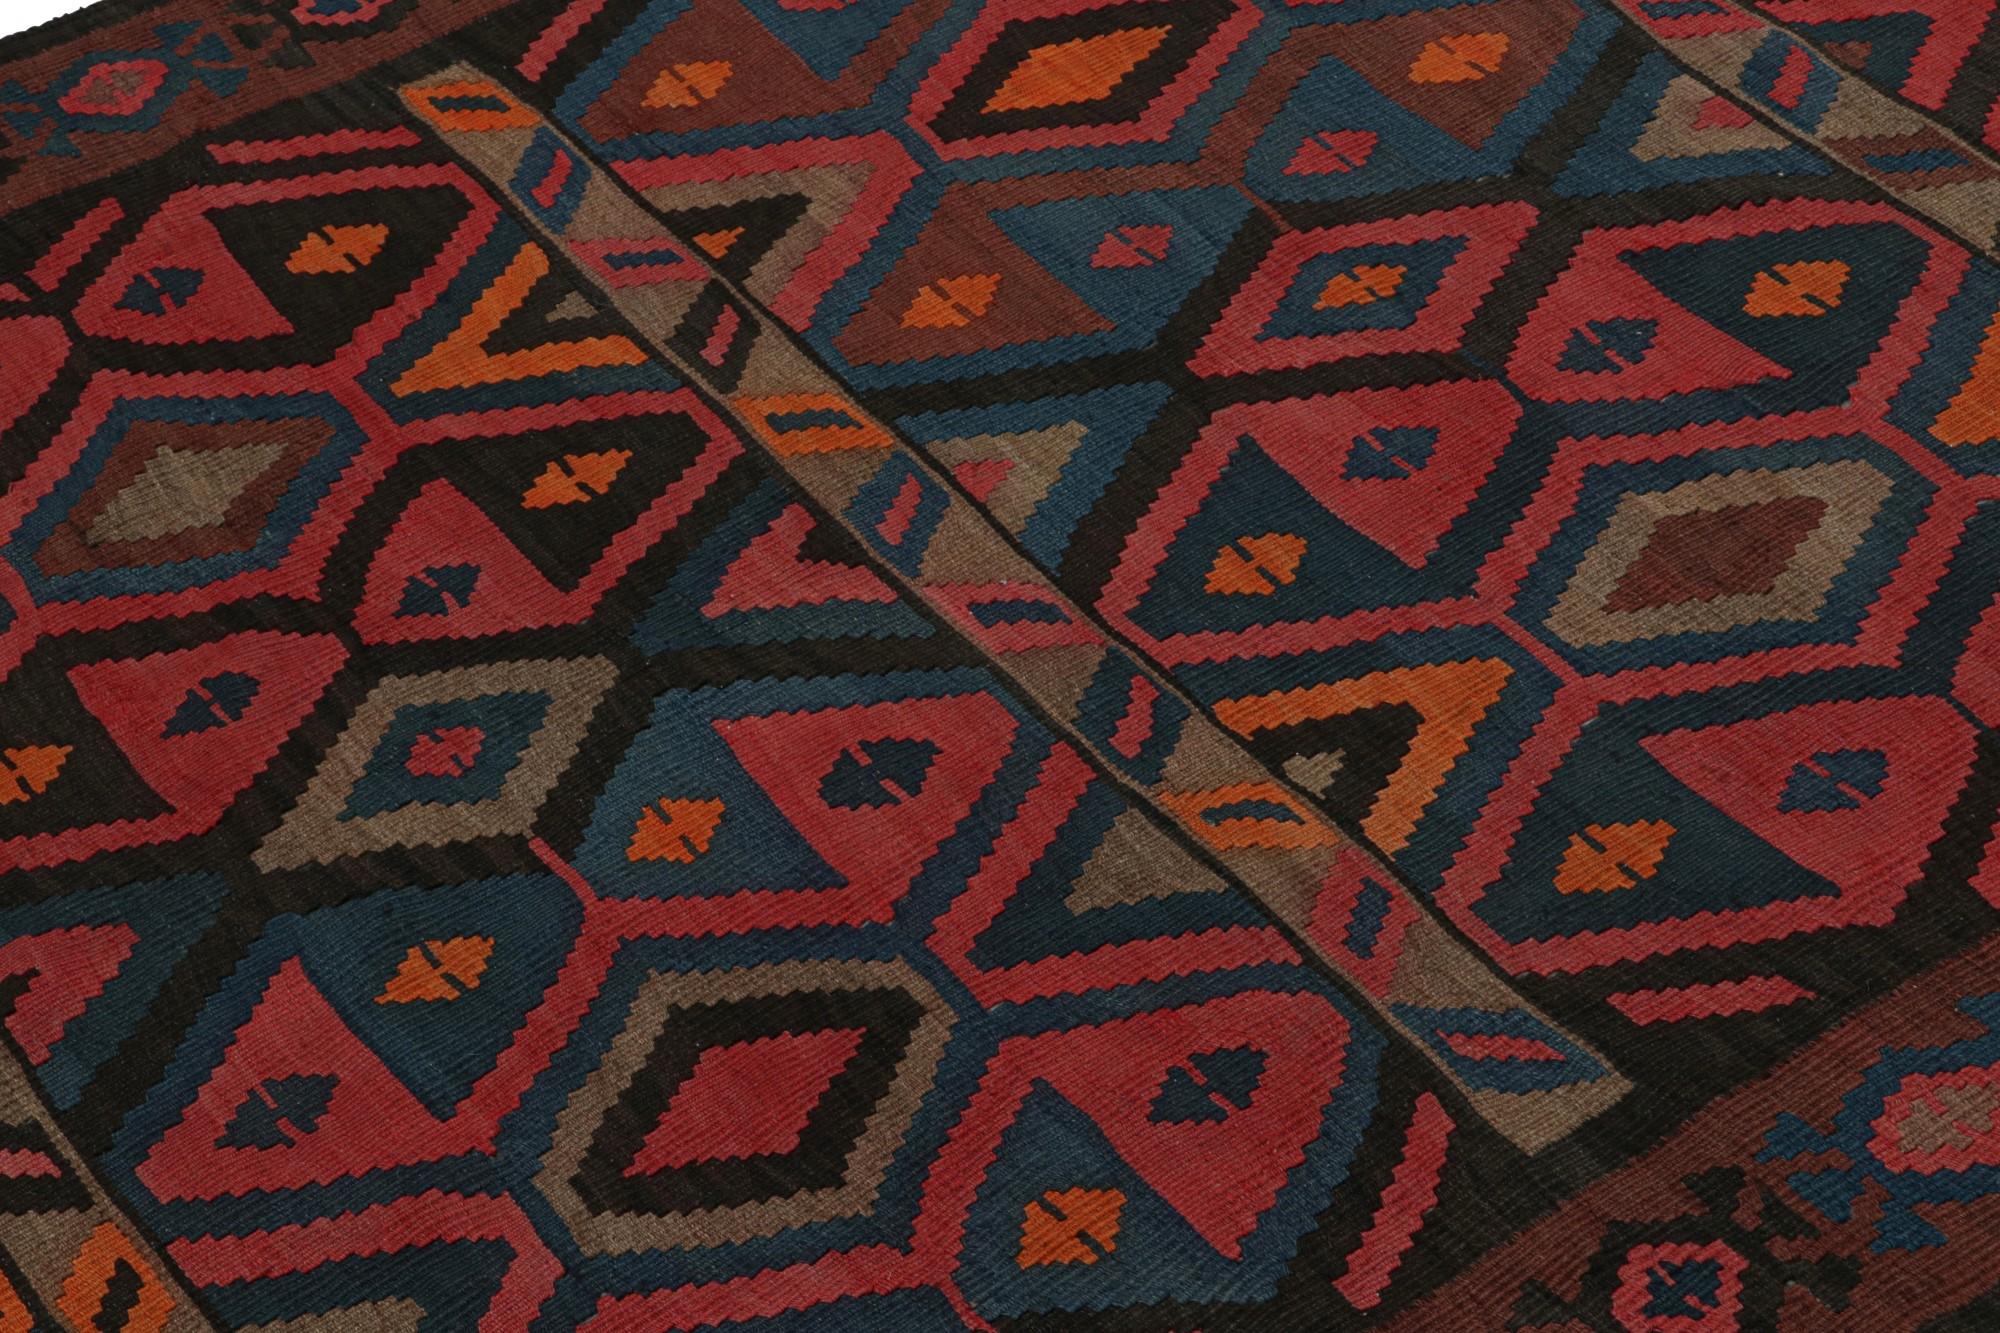 Vintage Afghan Tribal Kilim Rug, with Geometric Patterns, from Rug & Kilim In Good Condition For Sale In Long Island City, NY